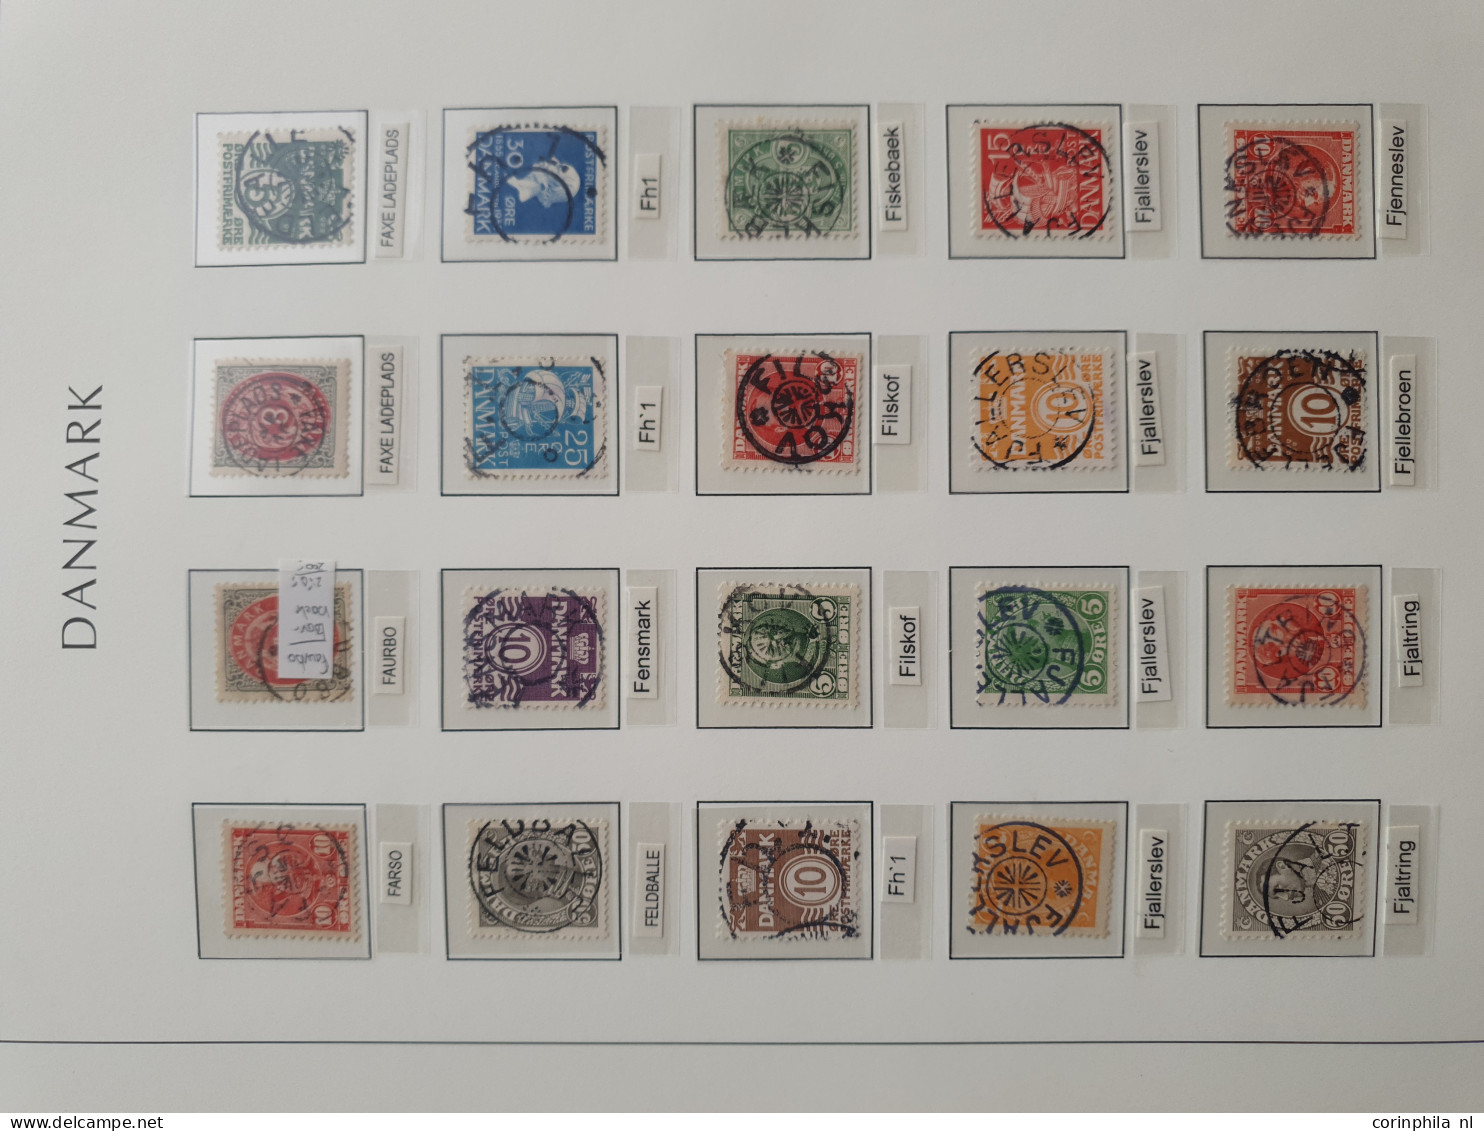 1874/1940, Star cancellations (Stjernestempler), comprehensive and advanced collection with ca.3200 stamps/fragments, 42